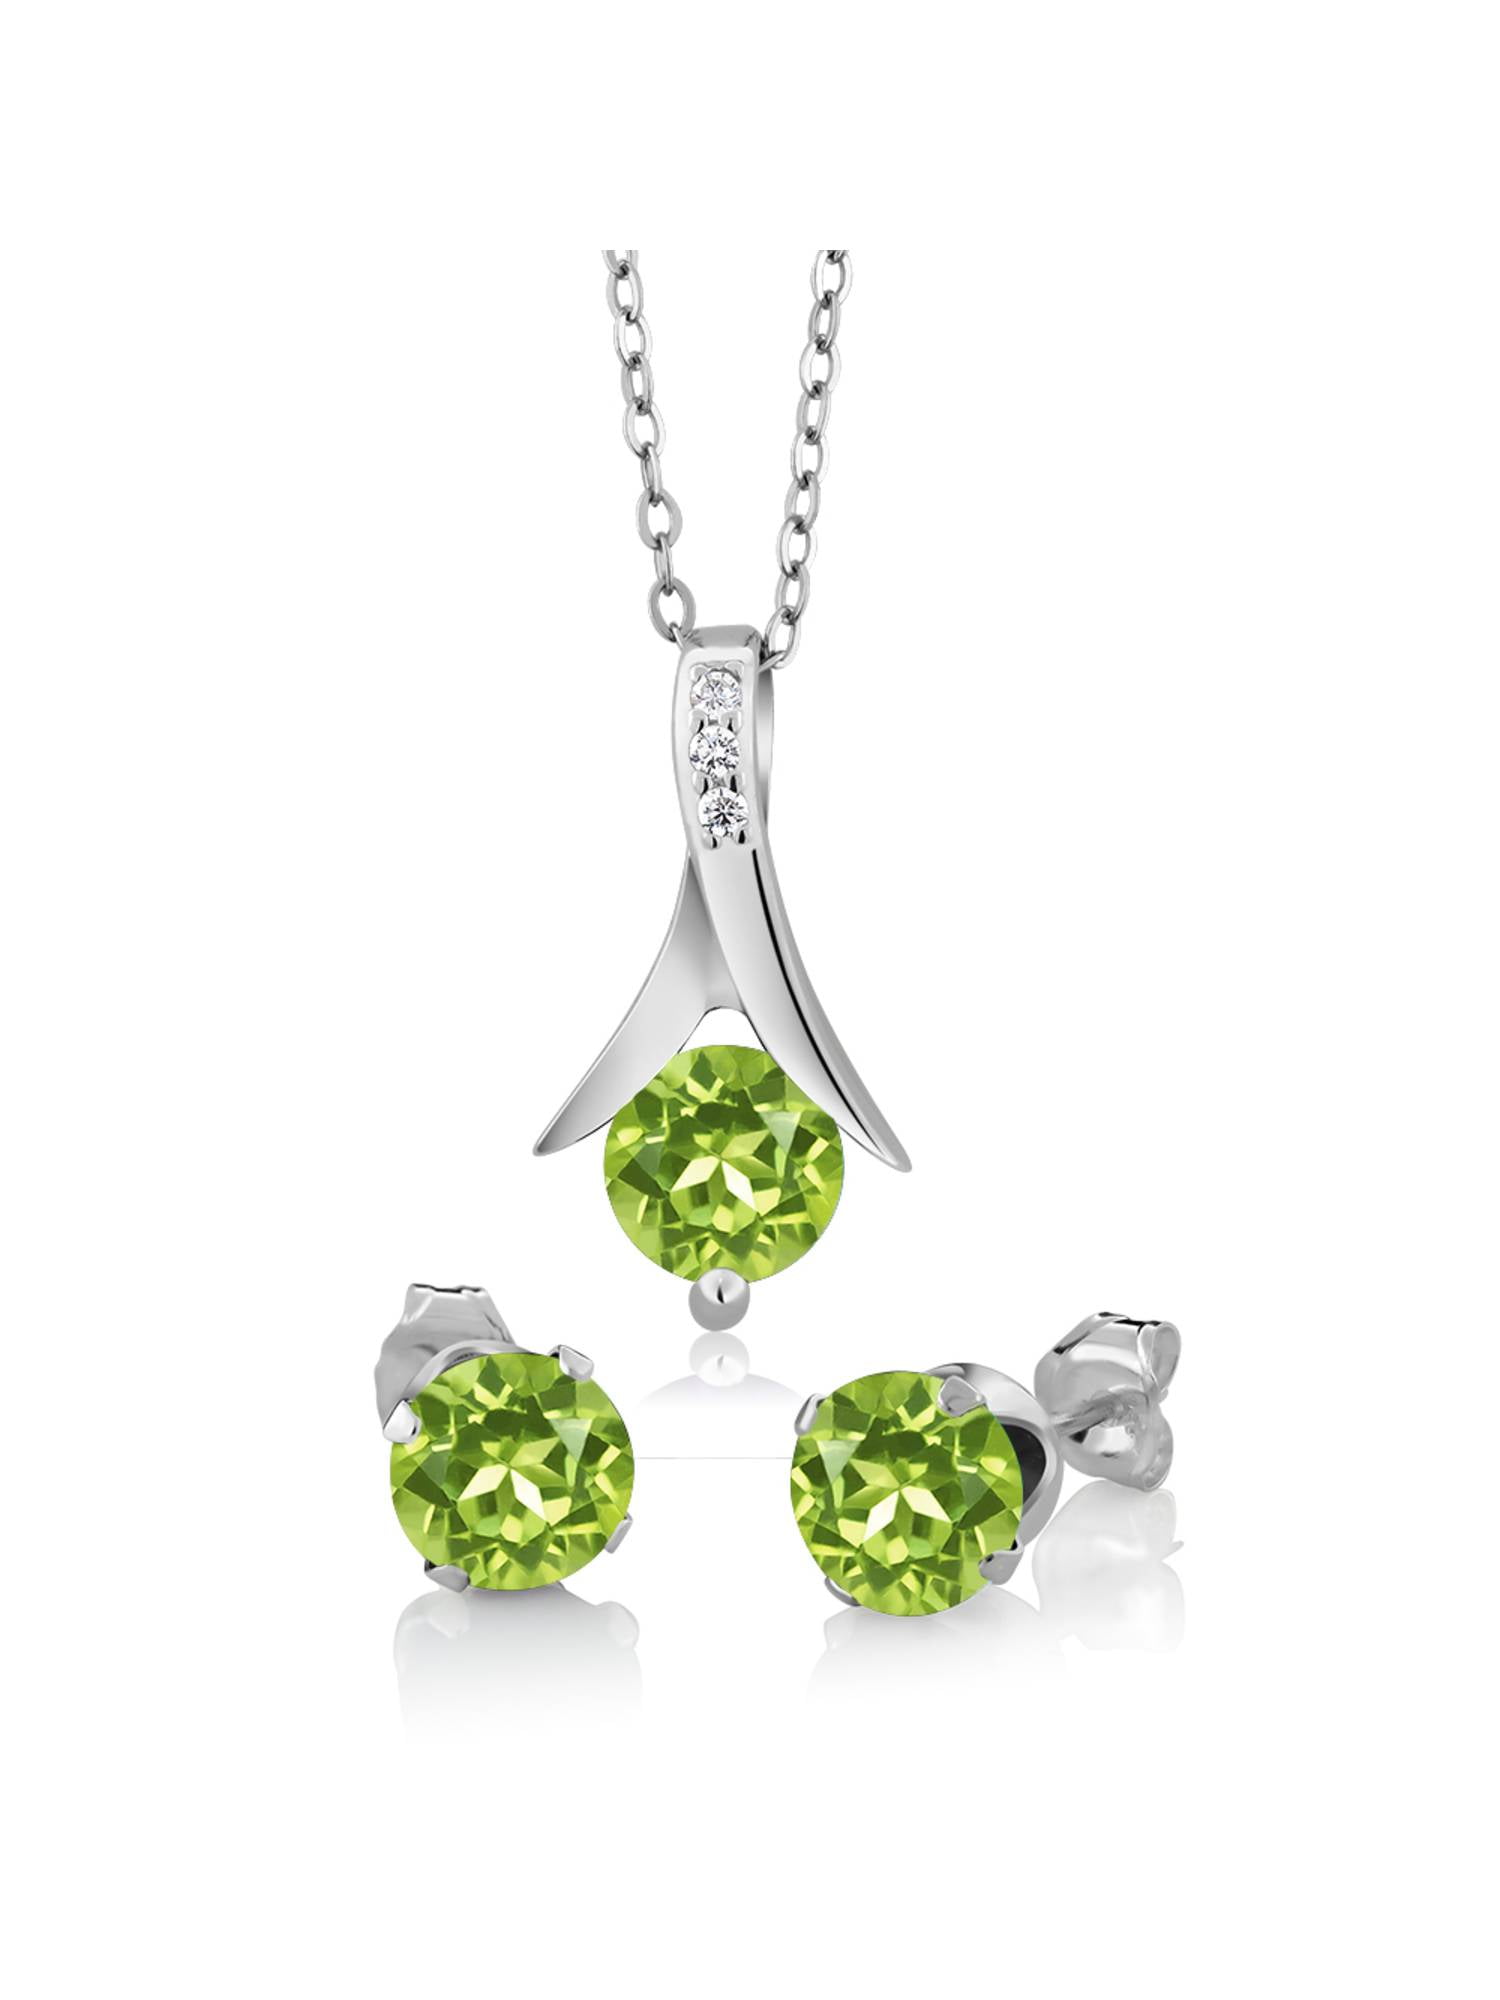 Gem Stone King 925 Sterling Silver Green Peridot Pendant and Earrings Set  3.00 Ct Round Gemstone Birthstone For Women with 18 inch Chain